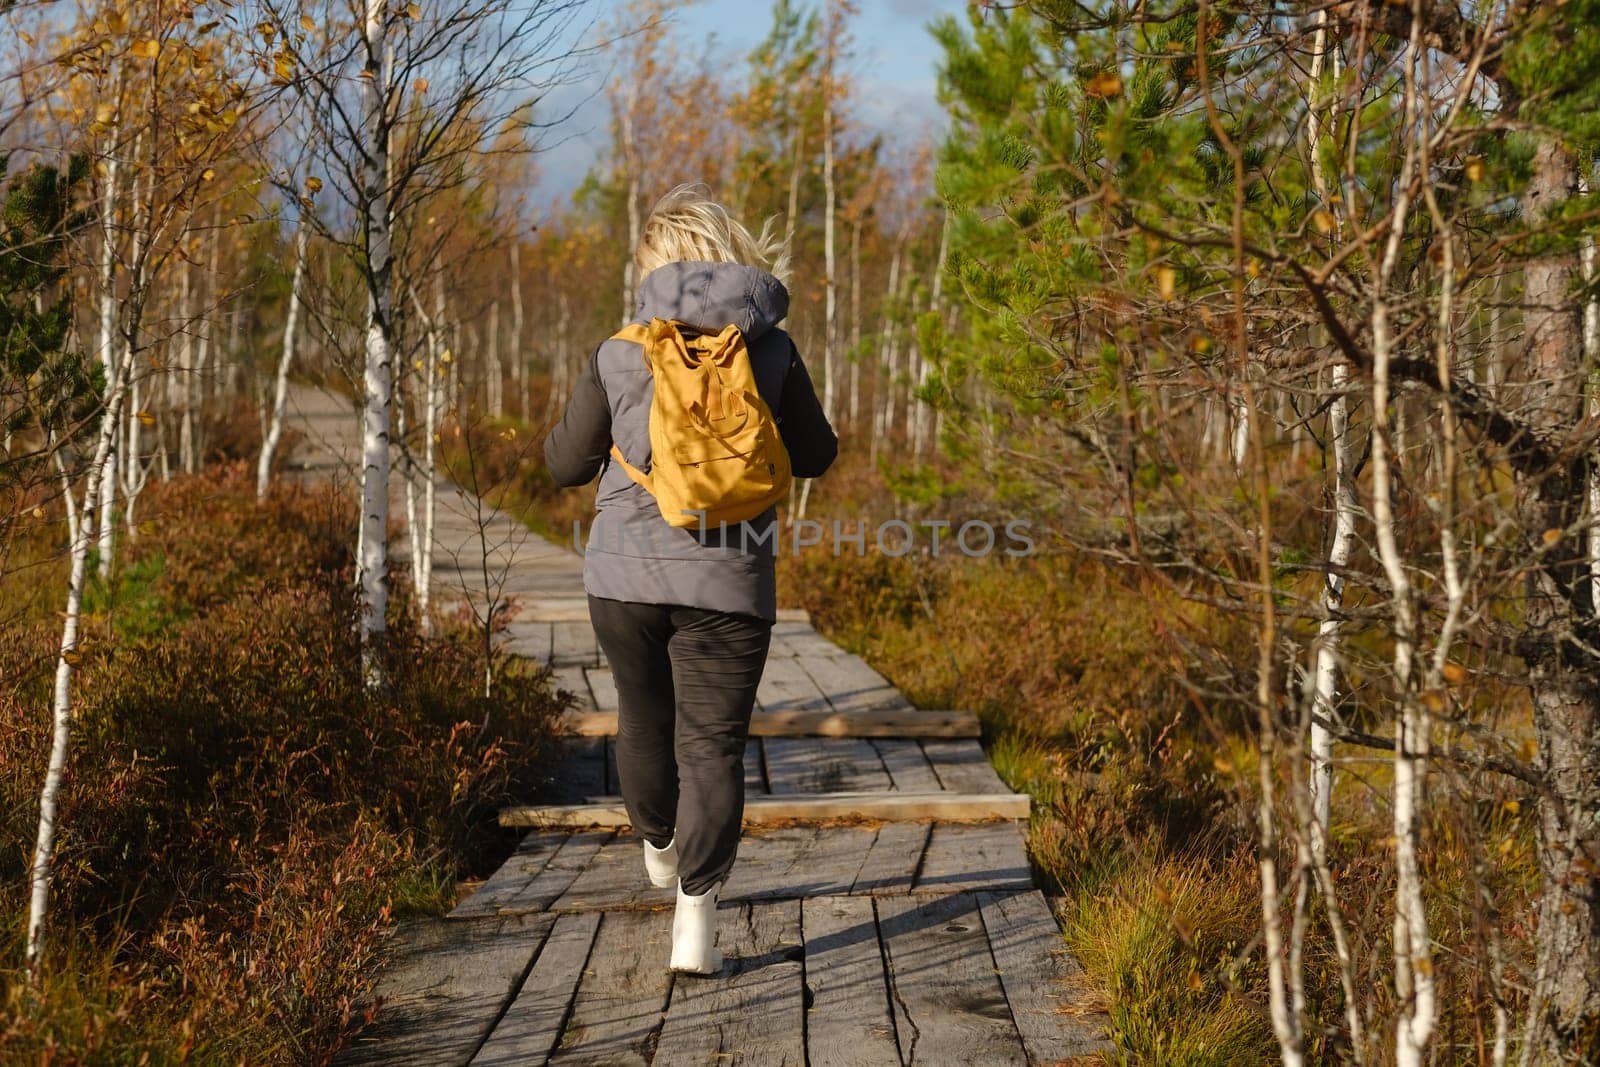 A woman with a backpack walks along a wooden path in a swamp in Yelnya, Belarus.